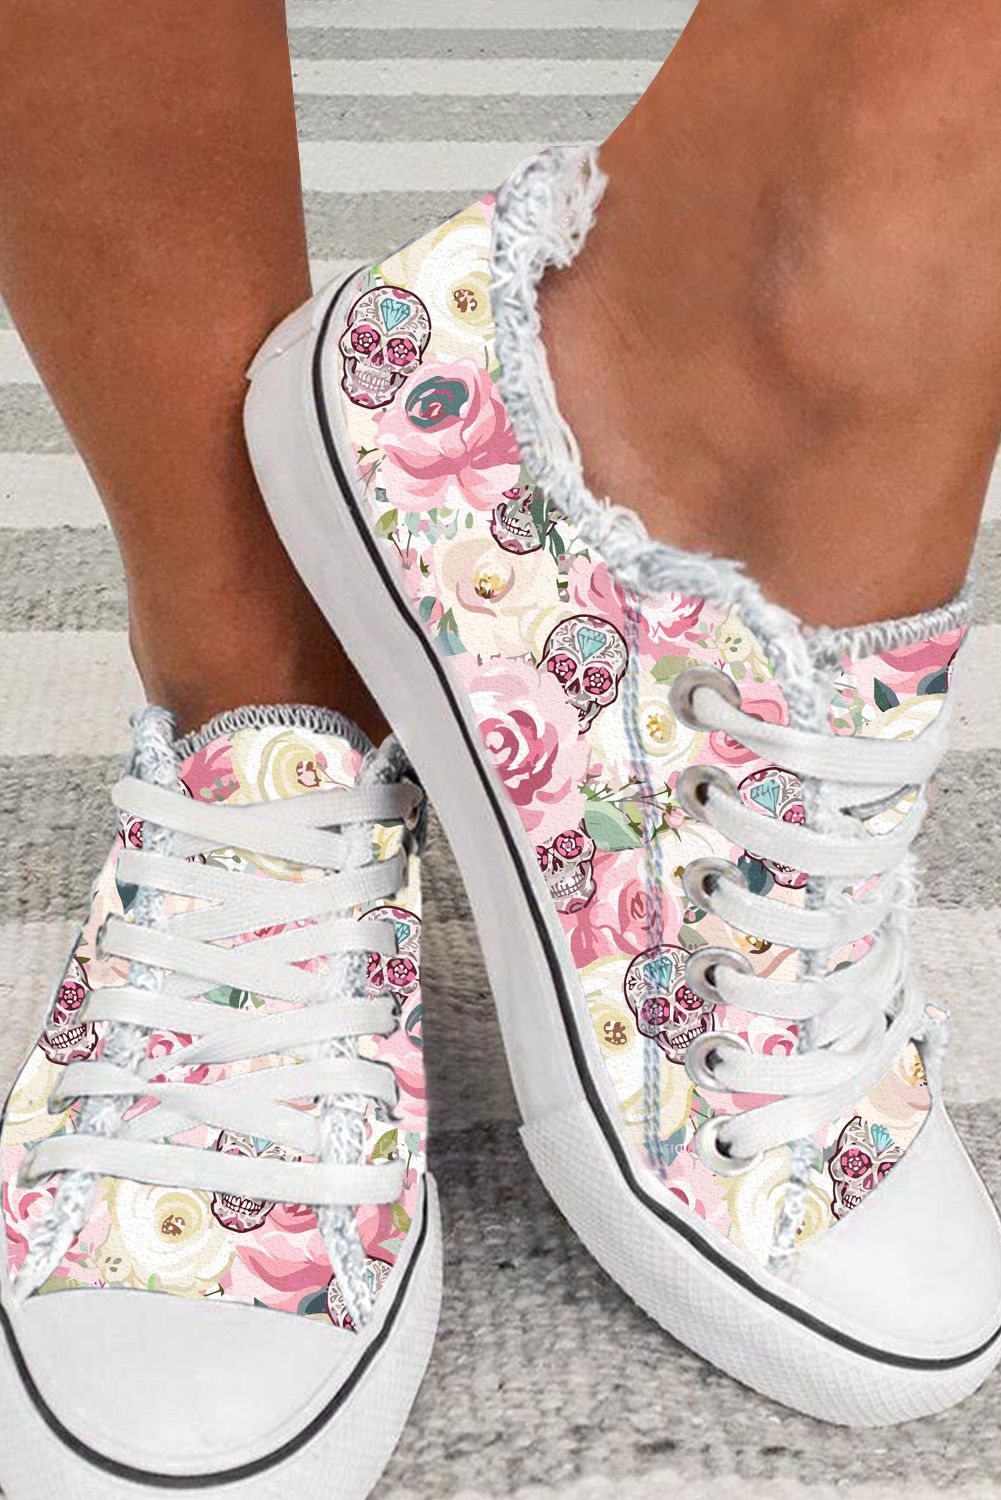 Pink Floral Skull Canvas Shoes $ 29.99 - Evaless